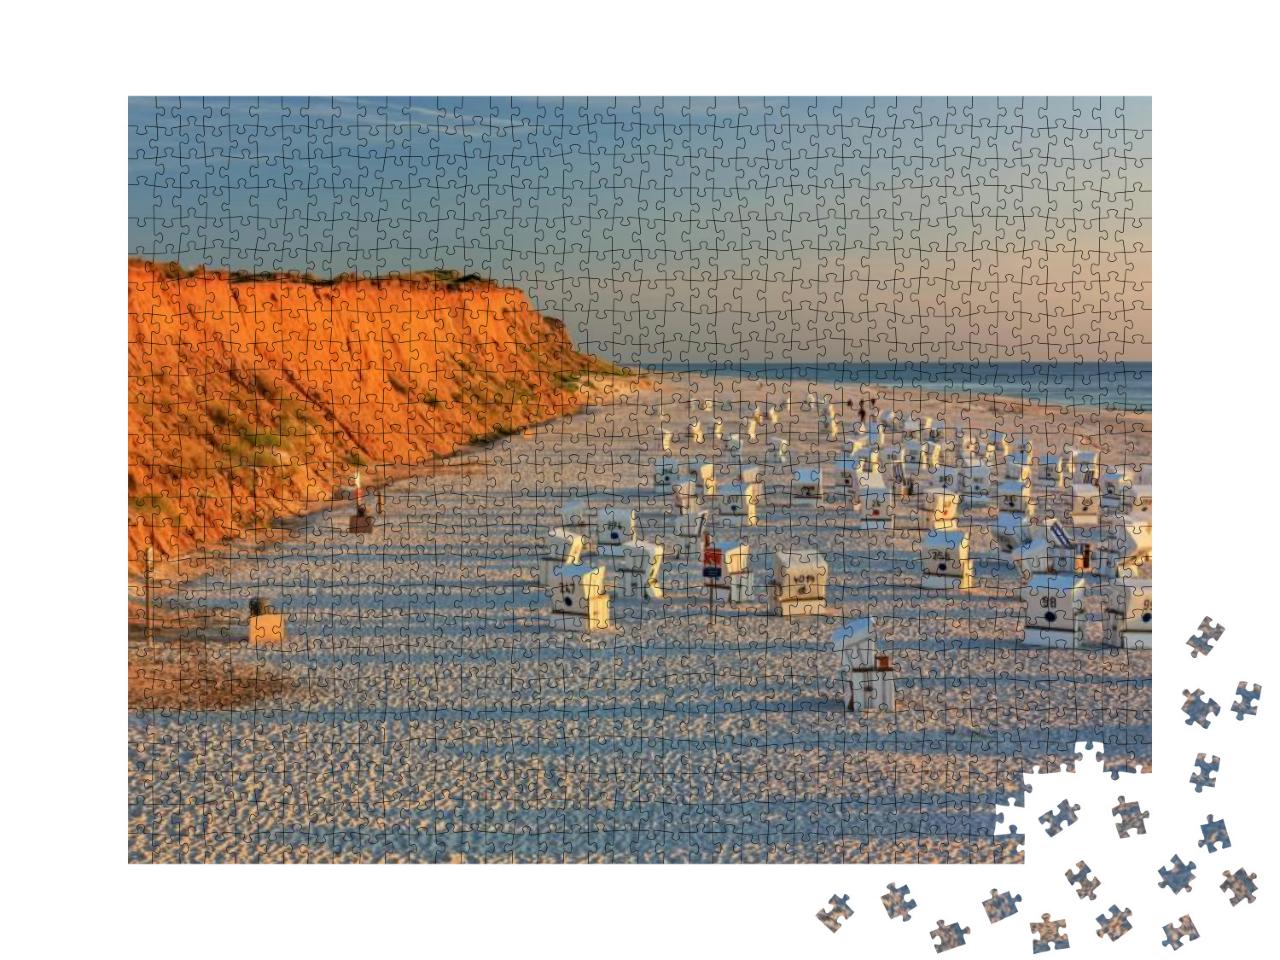 Beach with Strandkorbs Beach Basket Chairs At the Red Cli... Jigsaw Puzzle with 1000 pieces